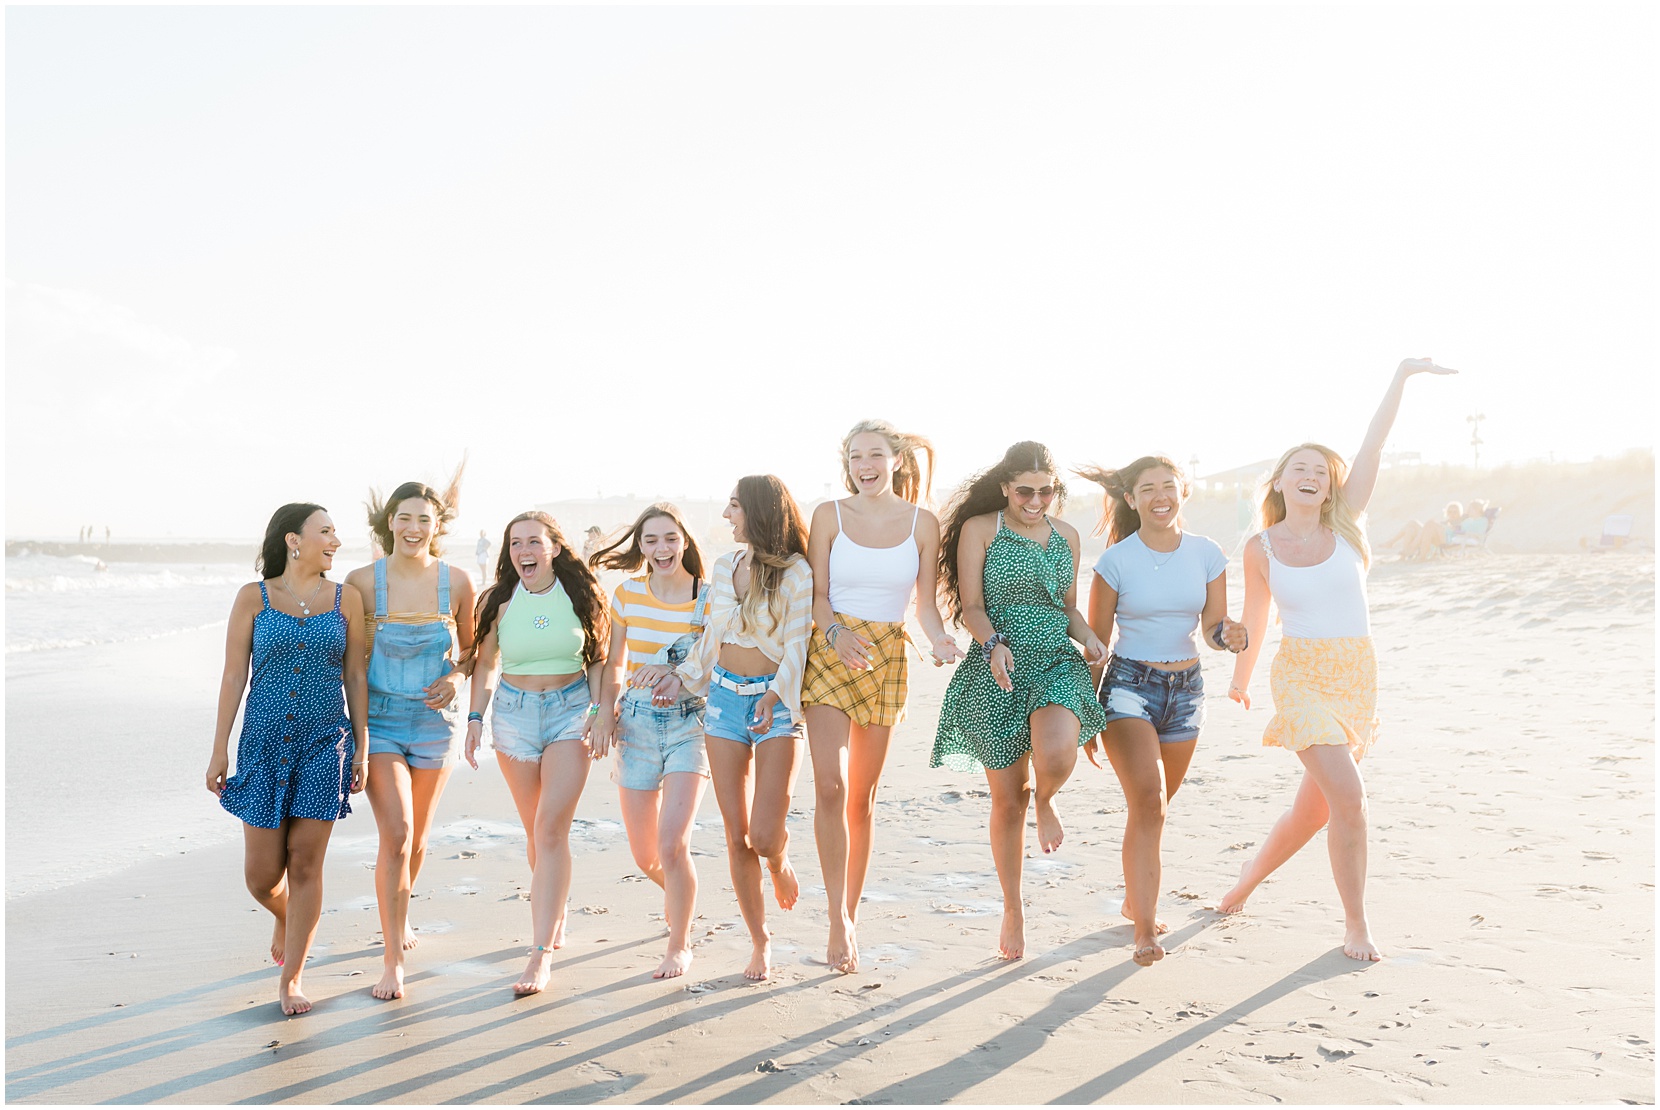 Nicole Marie Photography's senior model team skipping on the beach in Ocean City, New Jersey.